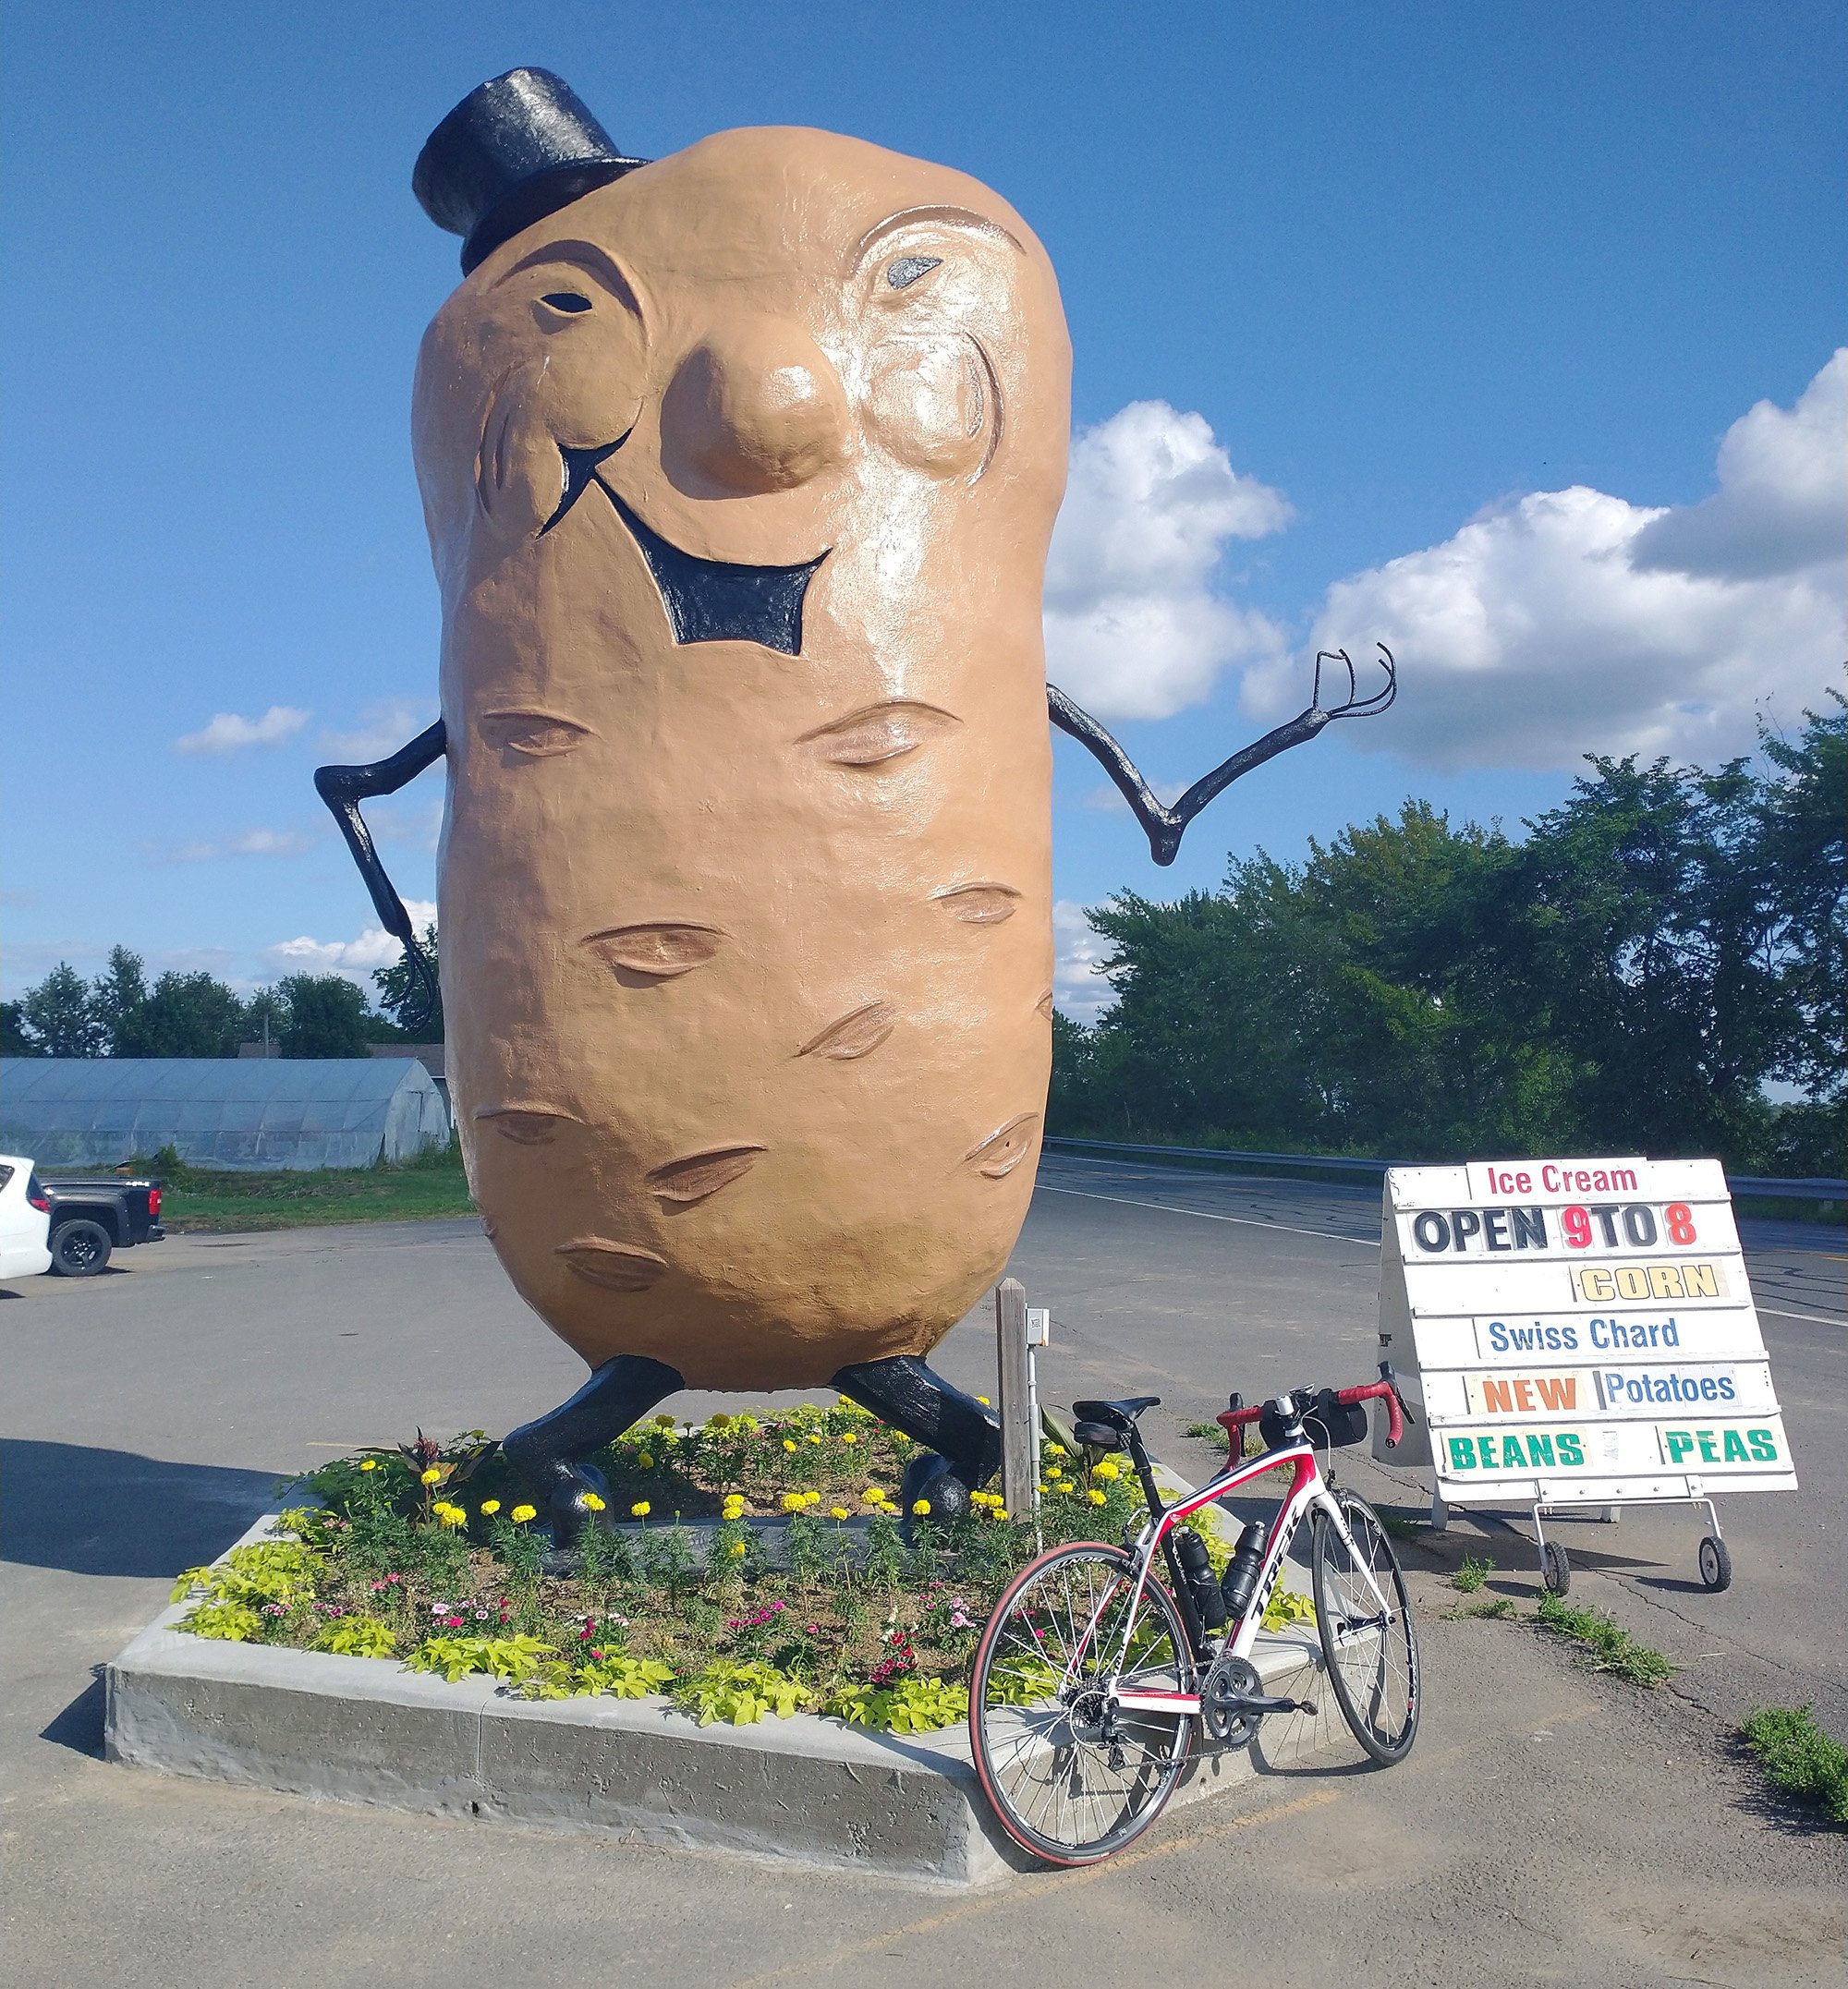 Somewhat more rural along the river, with a few farmer's markets, one boasting this badass potato man.